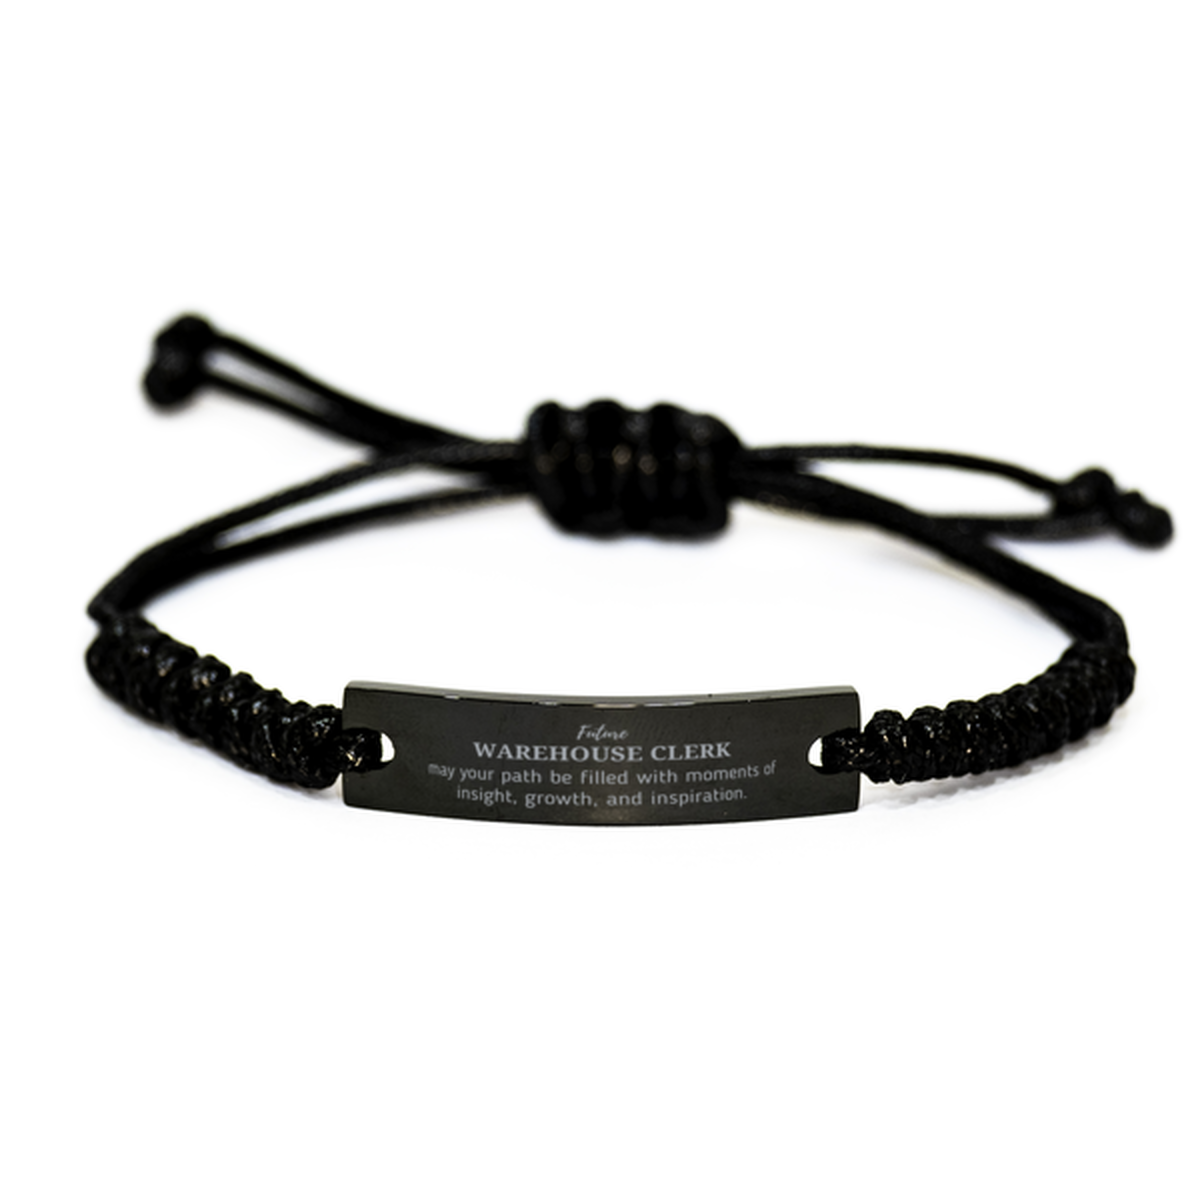 Future Warehouse Clerk Gifts, May your path be filled with moments of insight, Graduation Gifts for New Warehouse Clerk, Christmas Unique Black Rope Bracelet For Men, Women, Friends